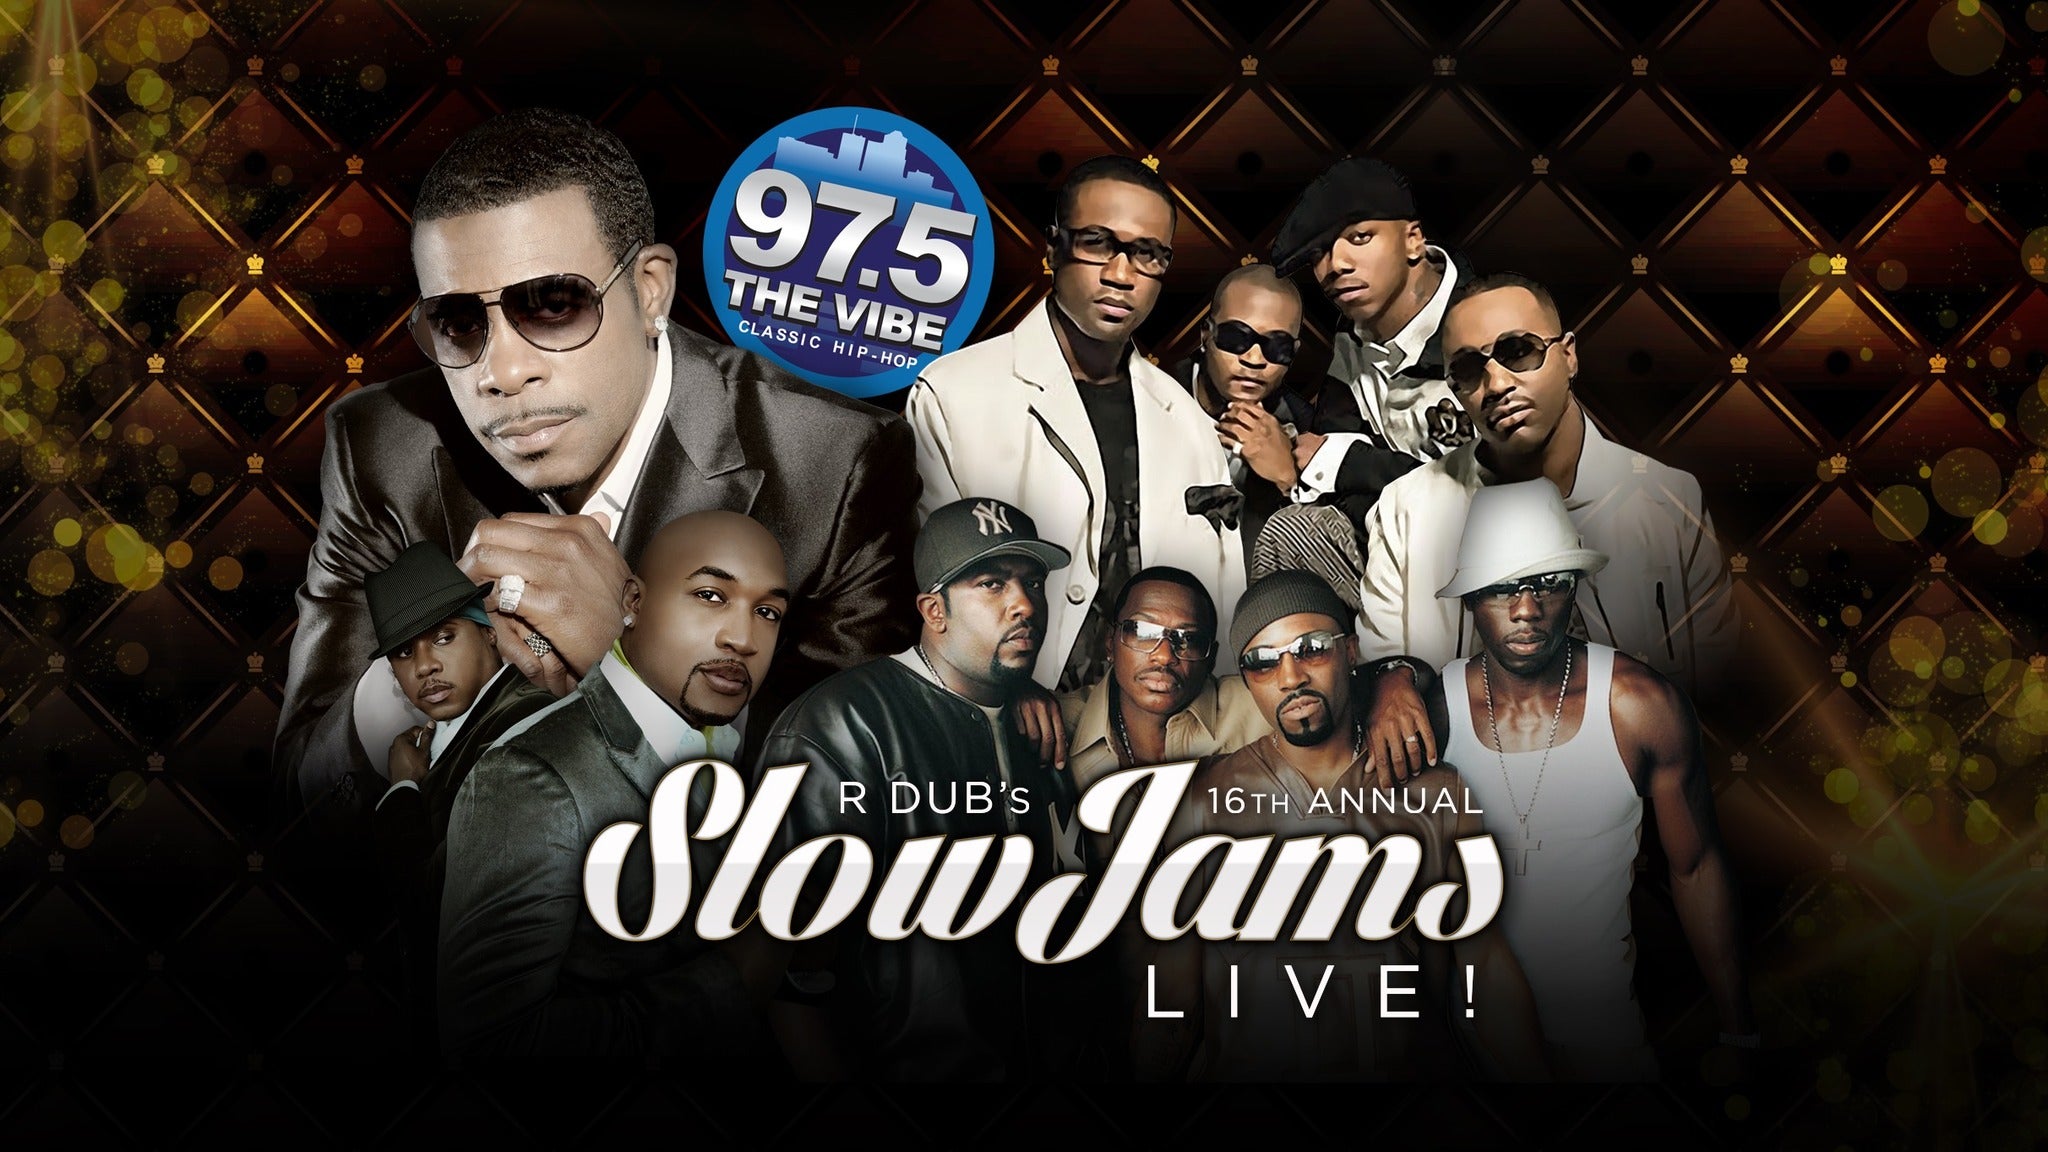 Hotels near R Dub's Slow Jams Live! Events